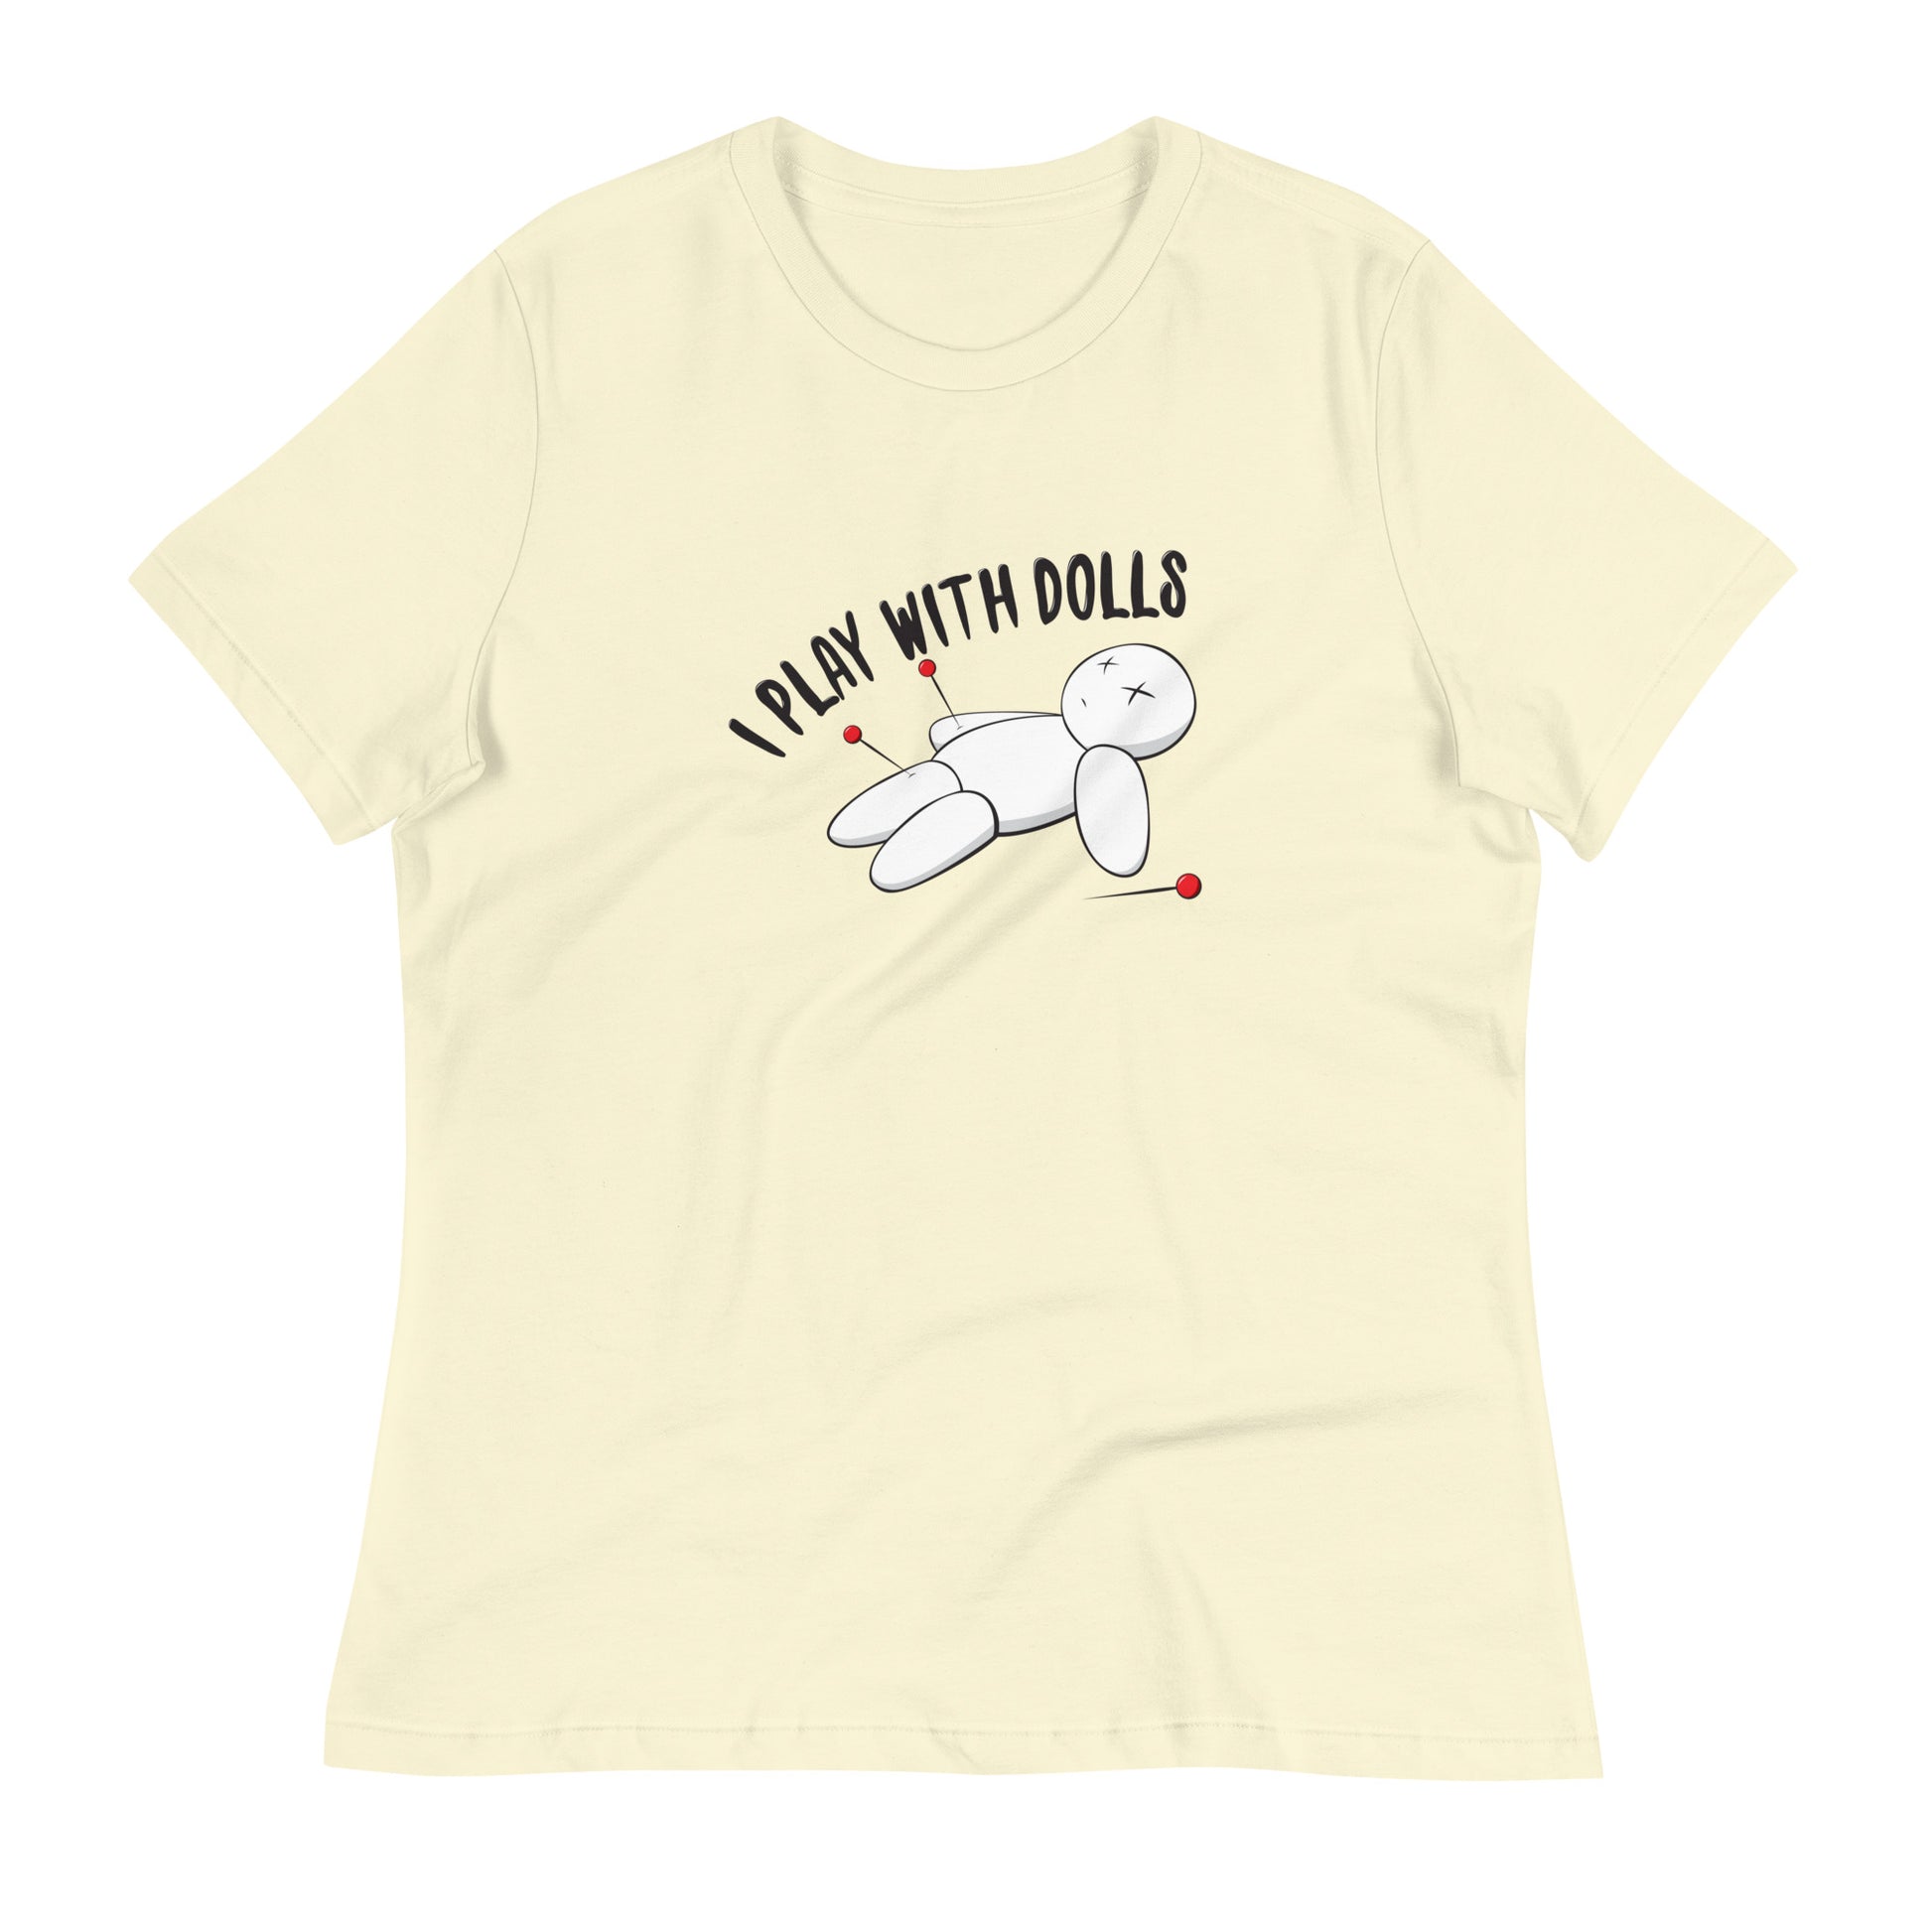 Citron (pale yellow) women's relaxed fit t-shirt with graphic of white voodoo doll with Xs for eyes stuck with several pins and text "I PLAY WITH DOLLS"